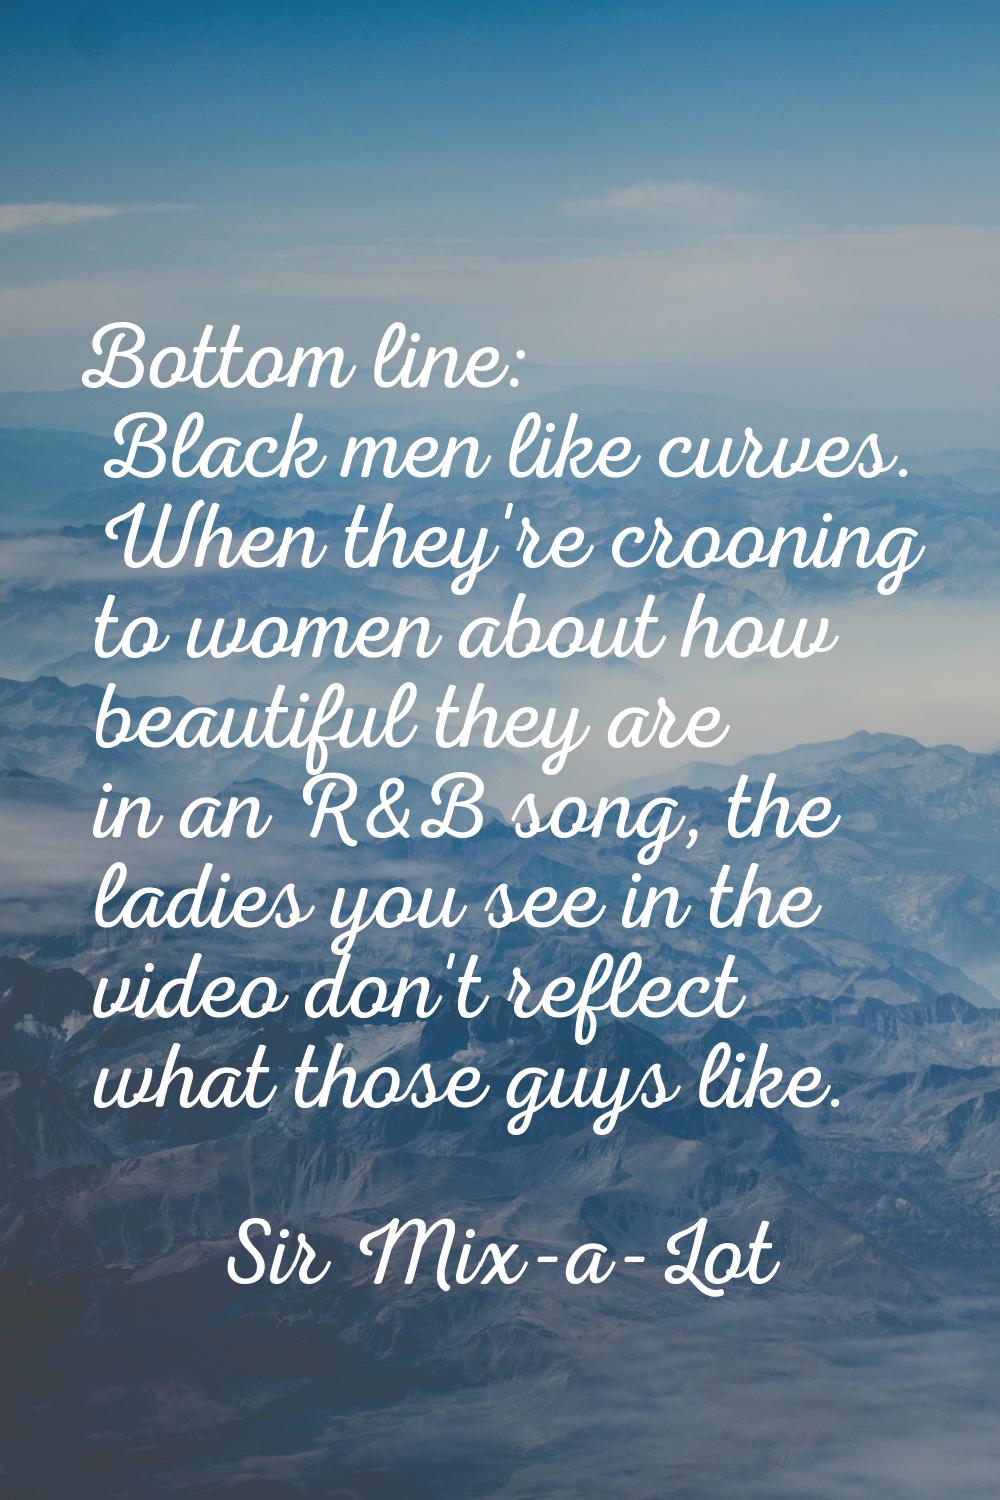 Bottom line: Black men like curves. When they're crooning to women about how beautiful they are in 